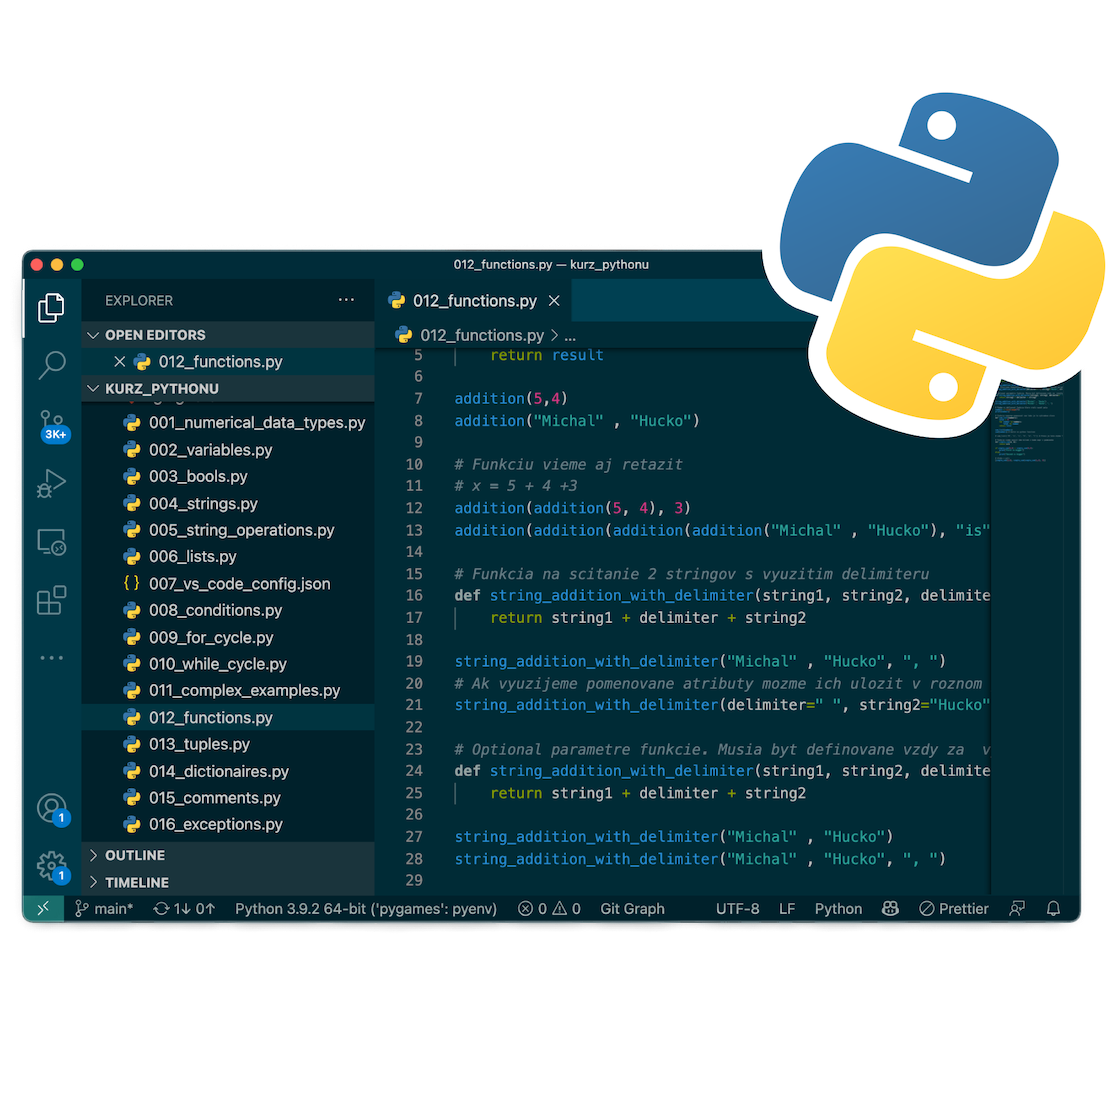 Screen from vscode with python code and python logo